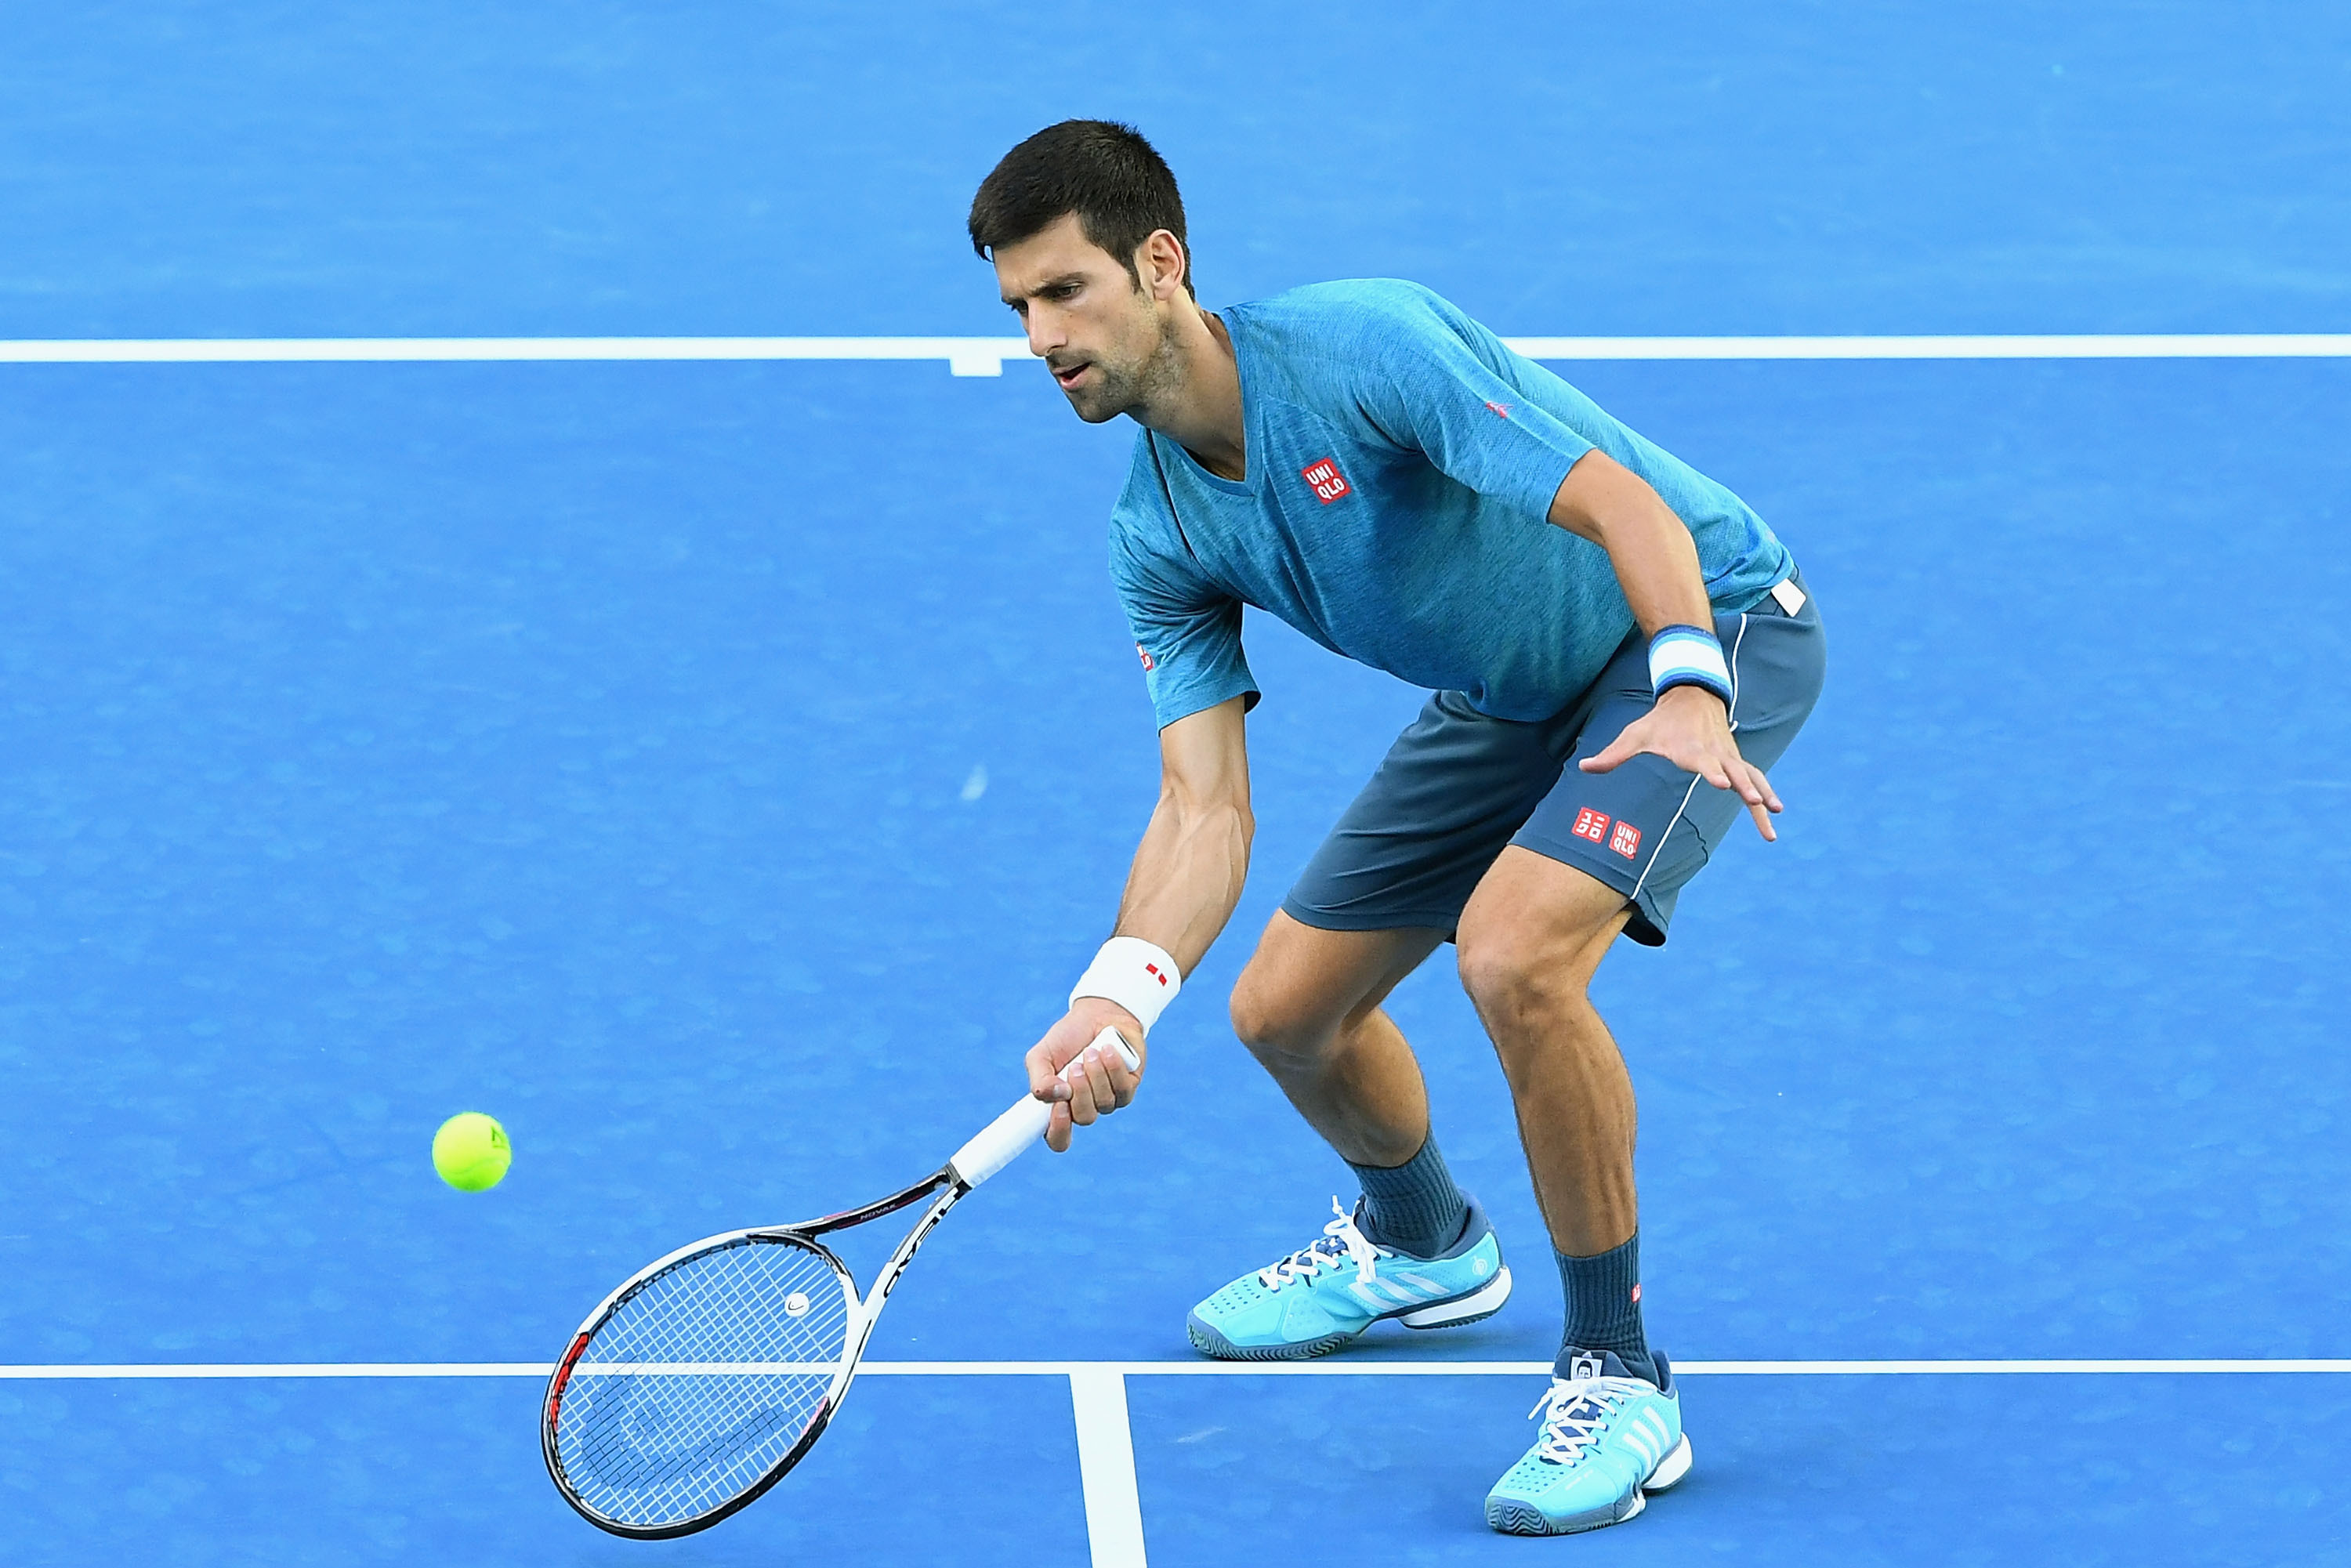 Australian Open 2017 Schedule: TV Coverage, Live Stream for Tuesday Draw | Bleacher Report | Latest News, Videos and Highlights